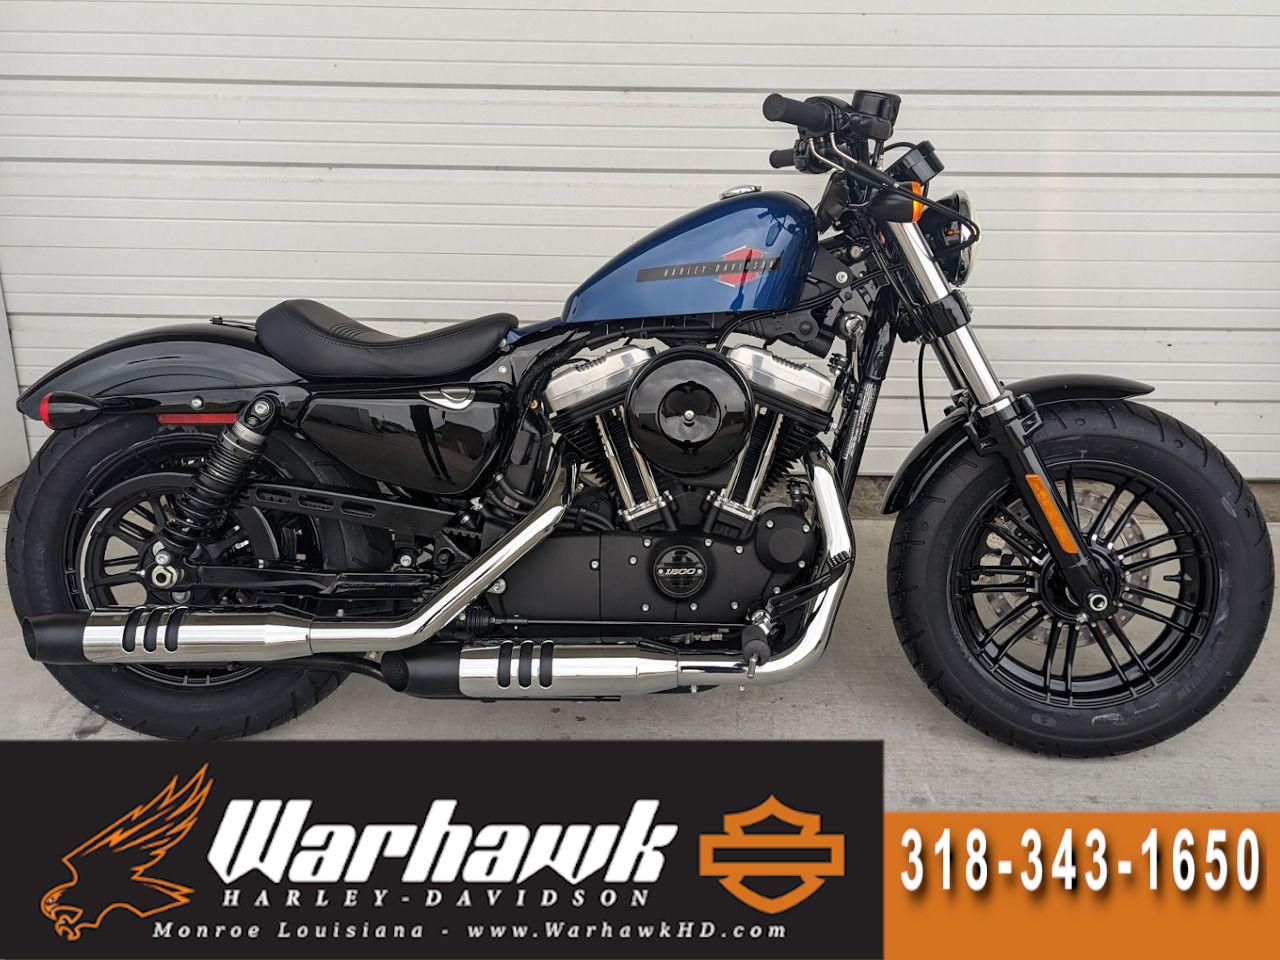 new 2022 harley-davidson sportster forty eight for sale near me - Photo 1